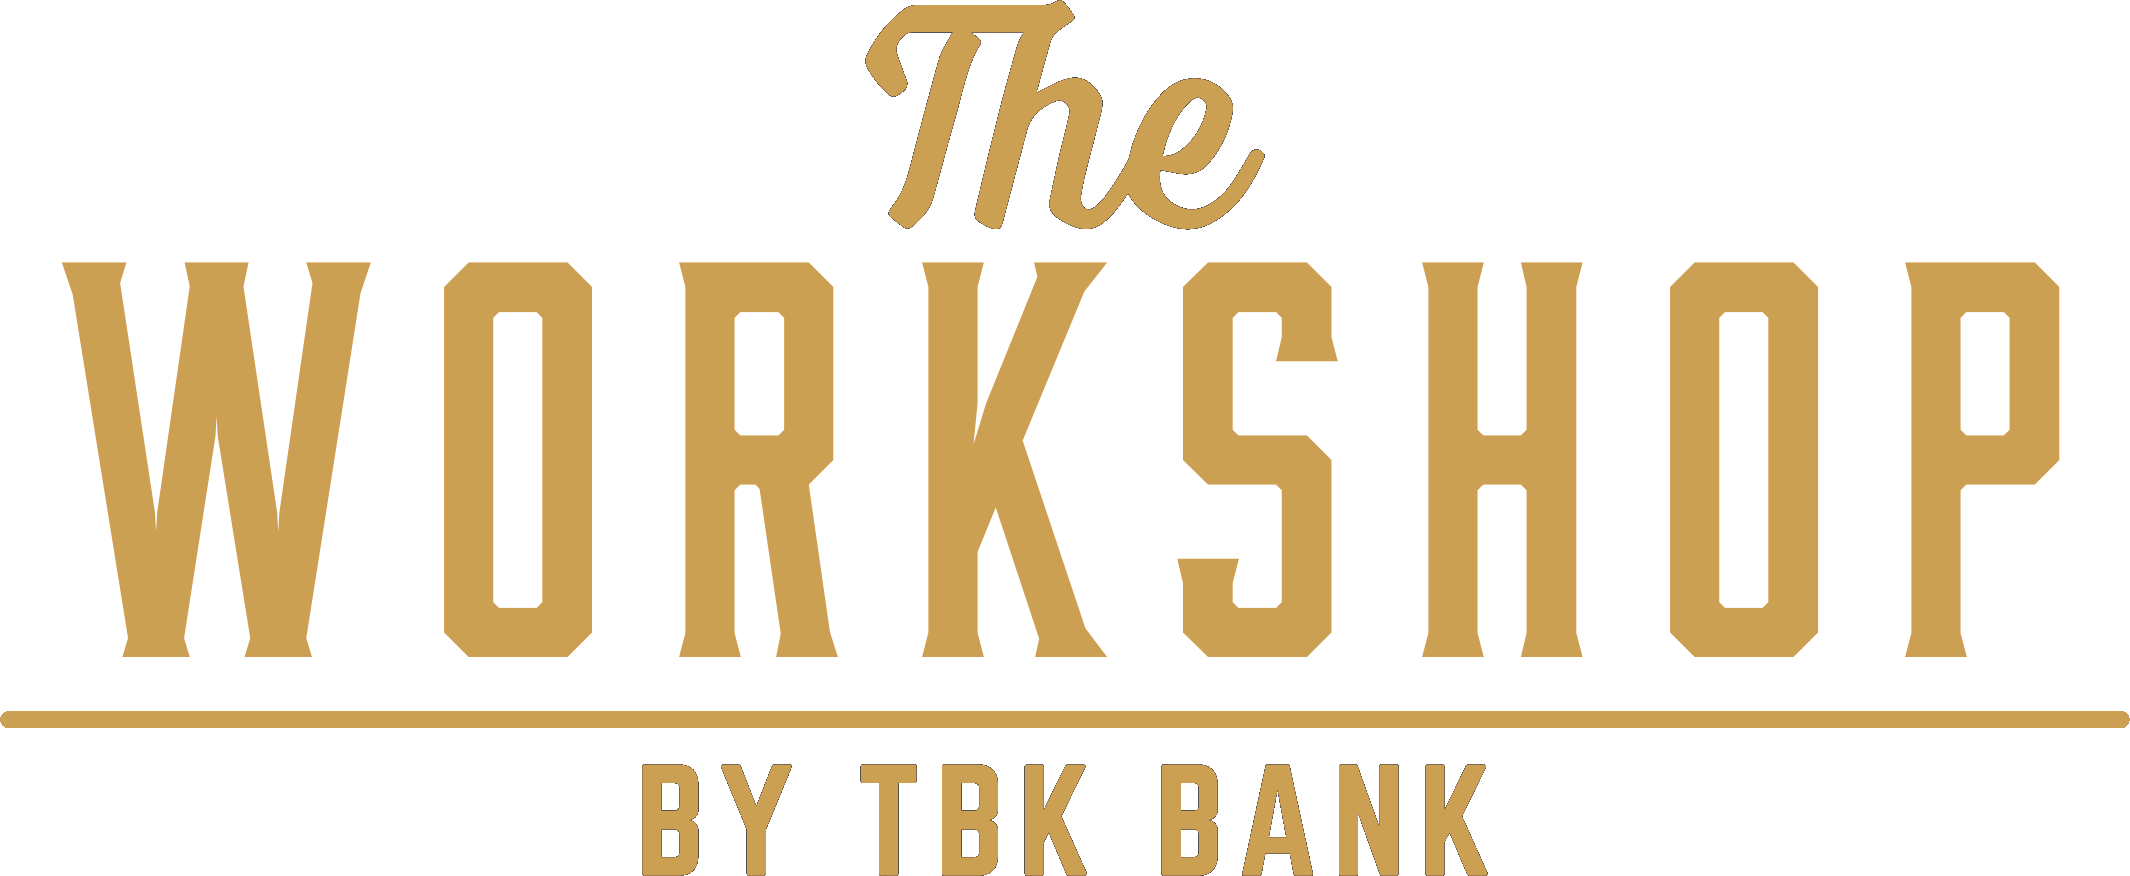 The Workshop by TBK Bank